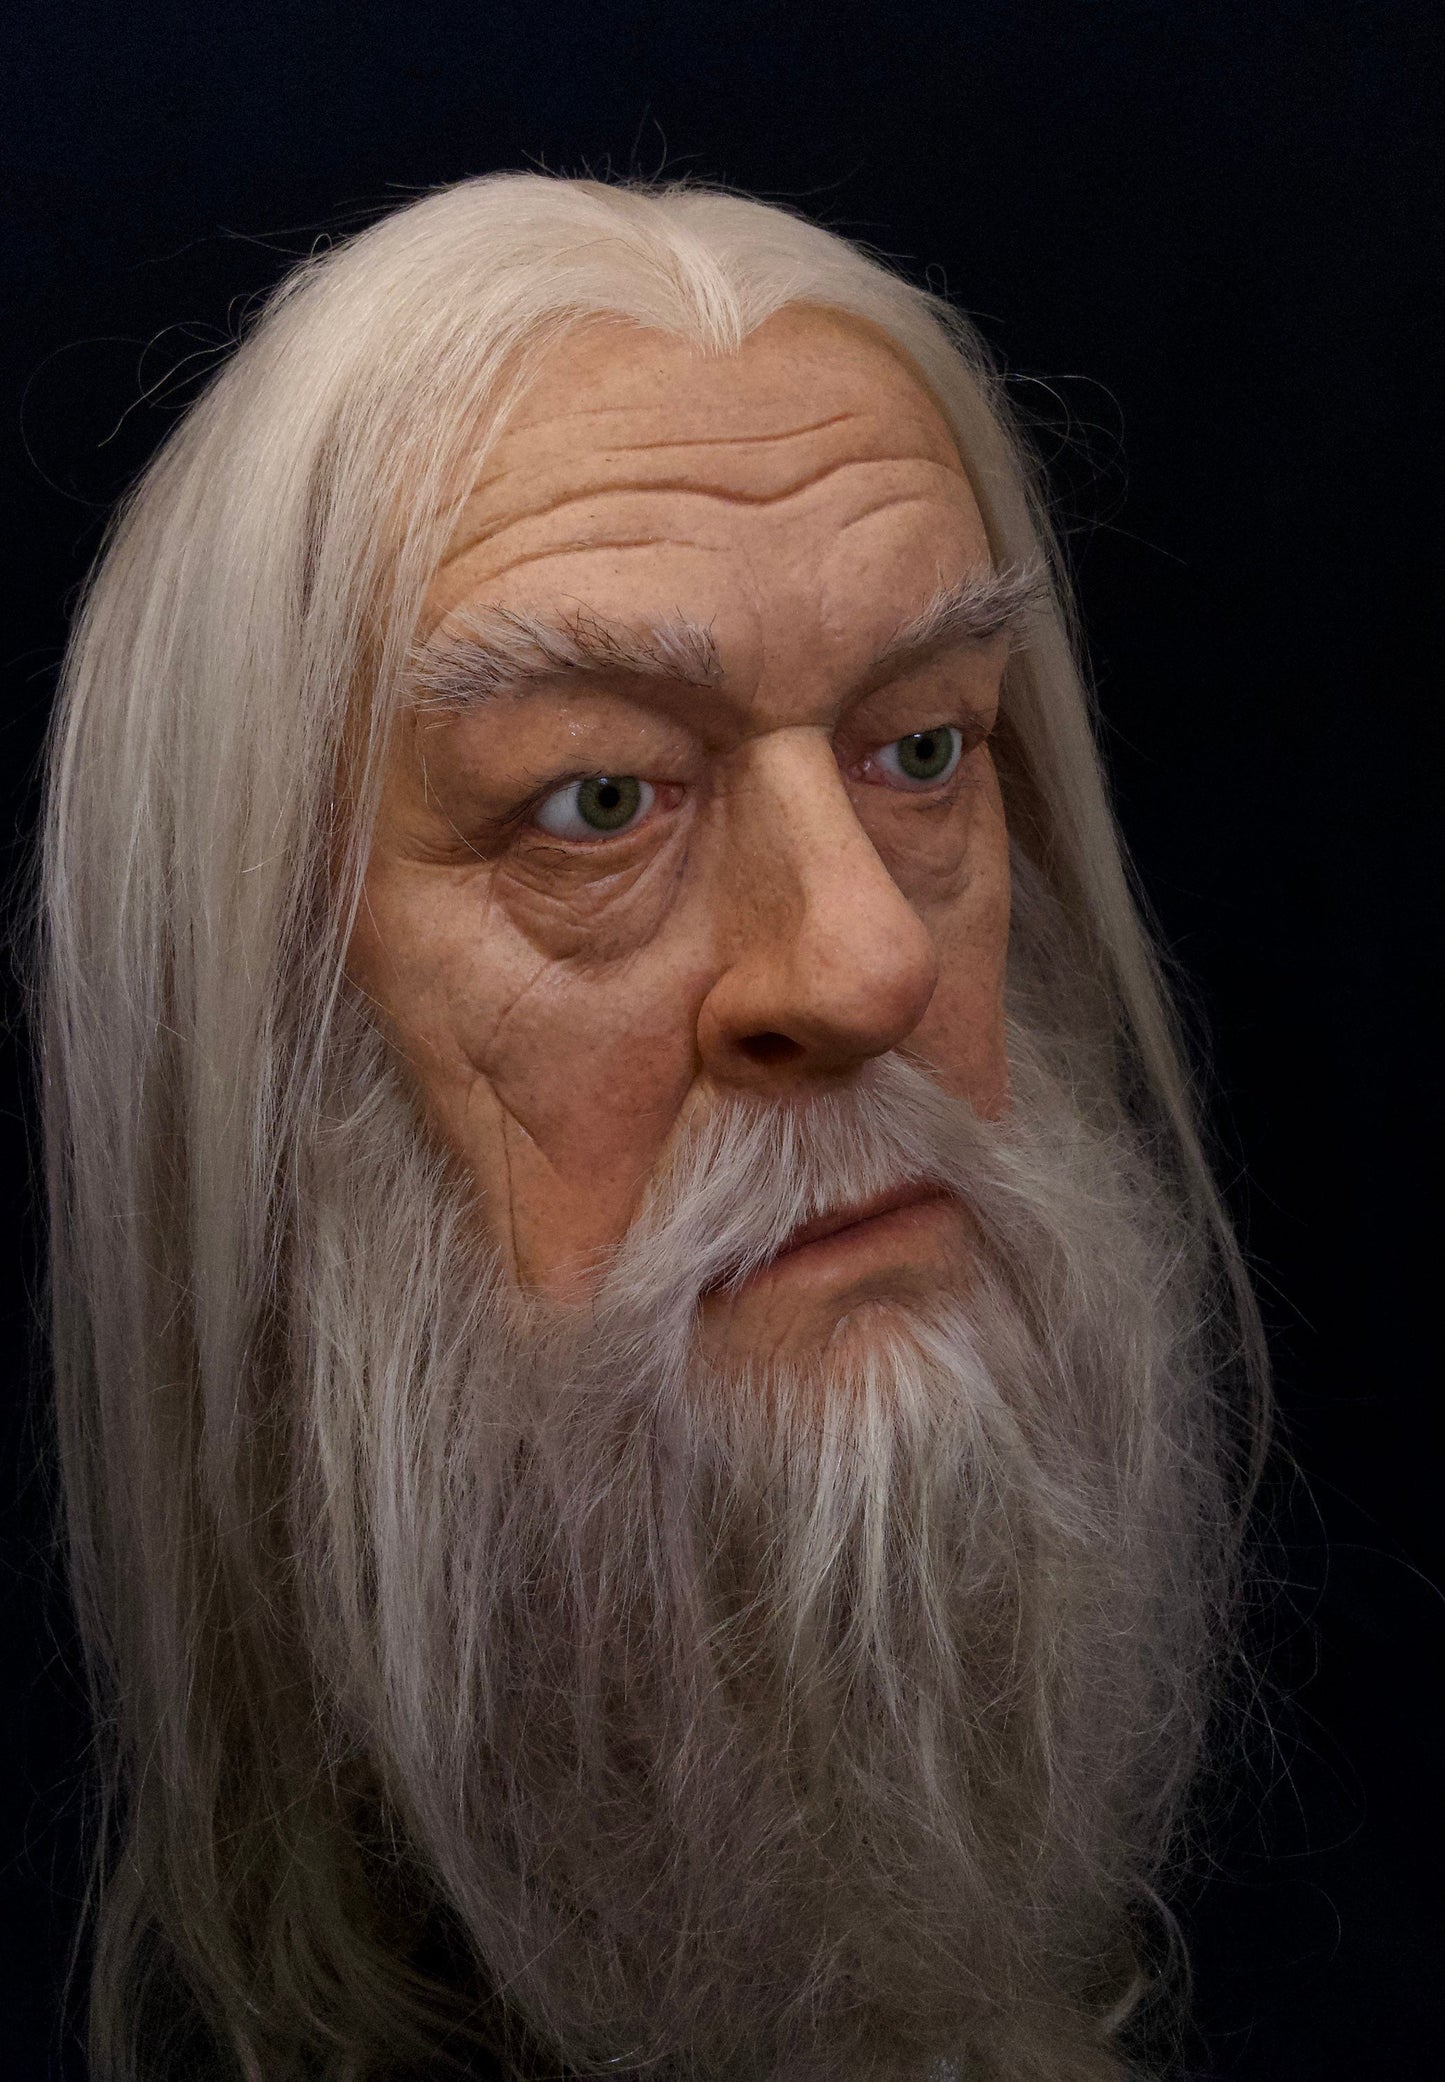 Dumbedore - harry potter 1:1 life -size silicone bust - made to order